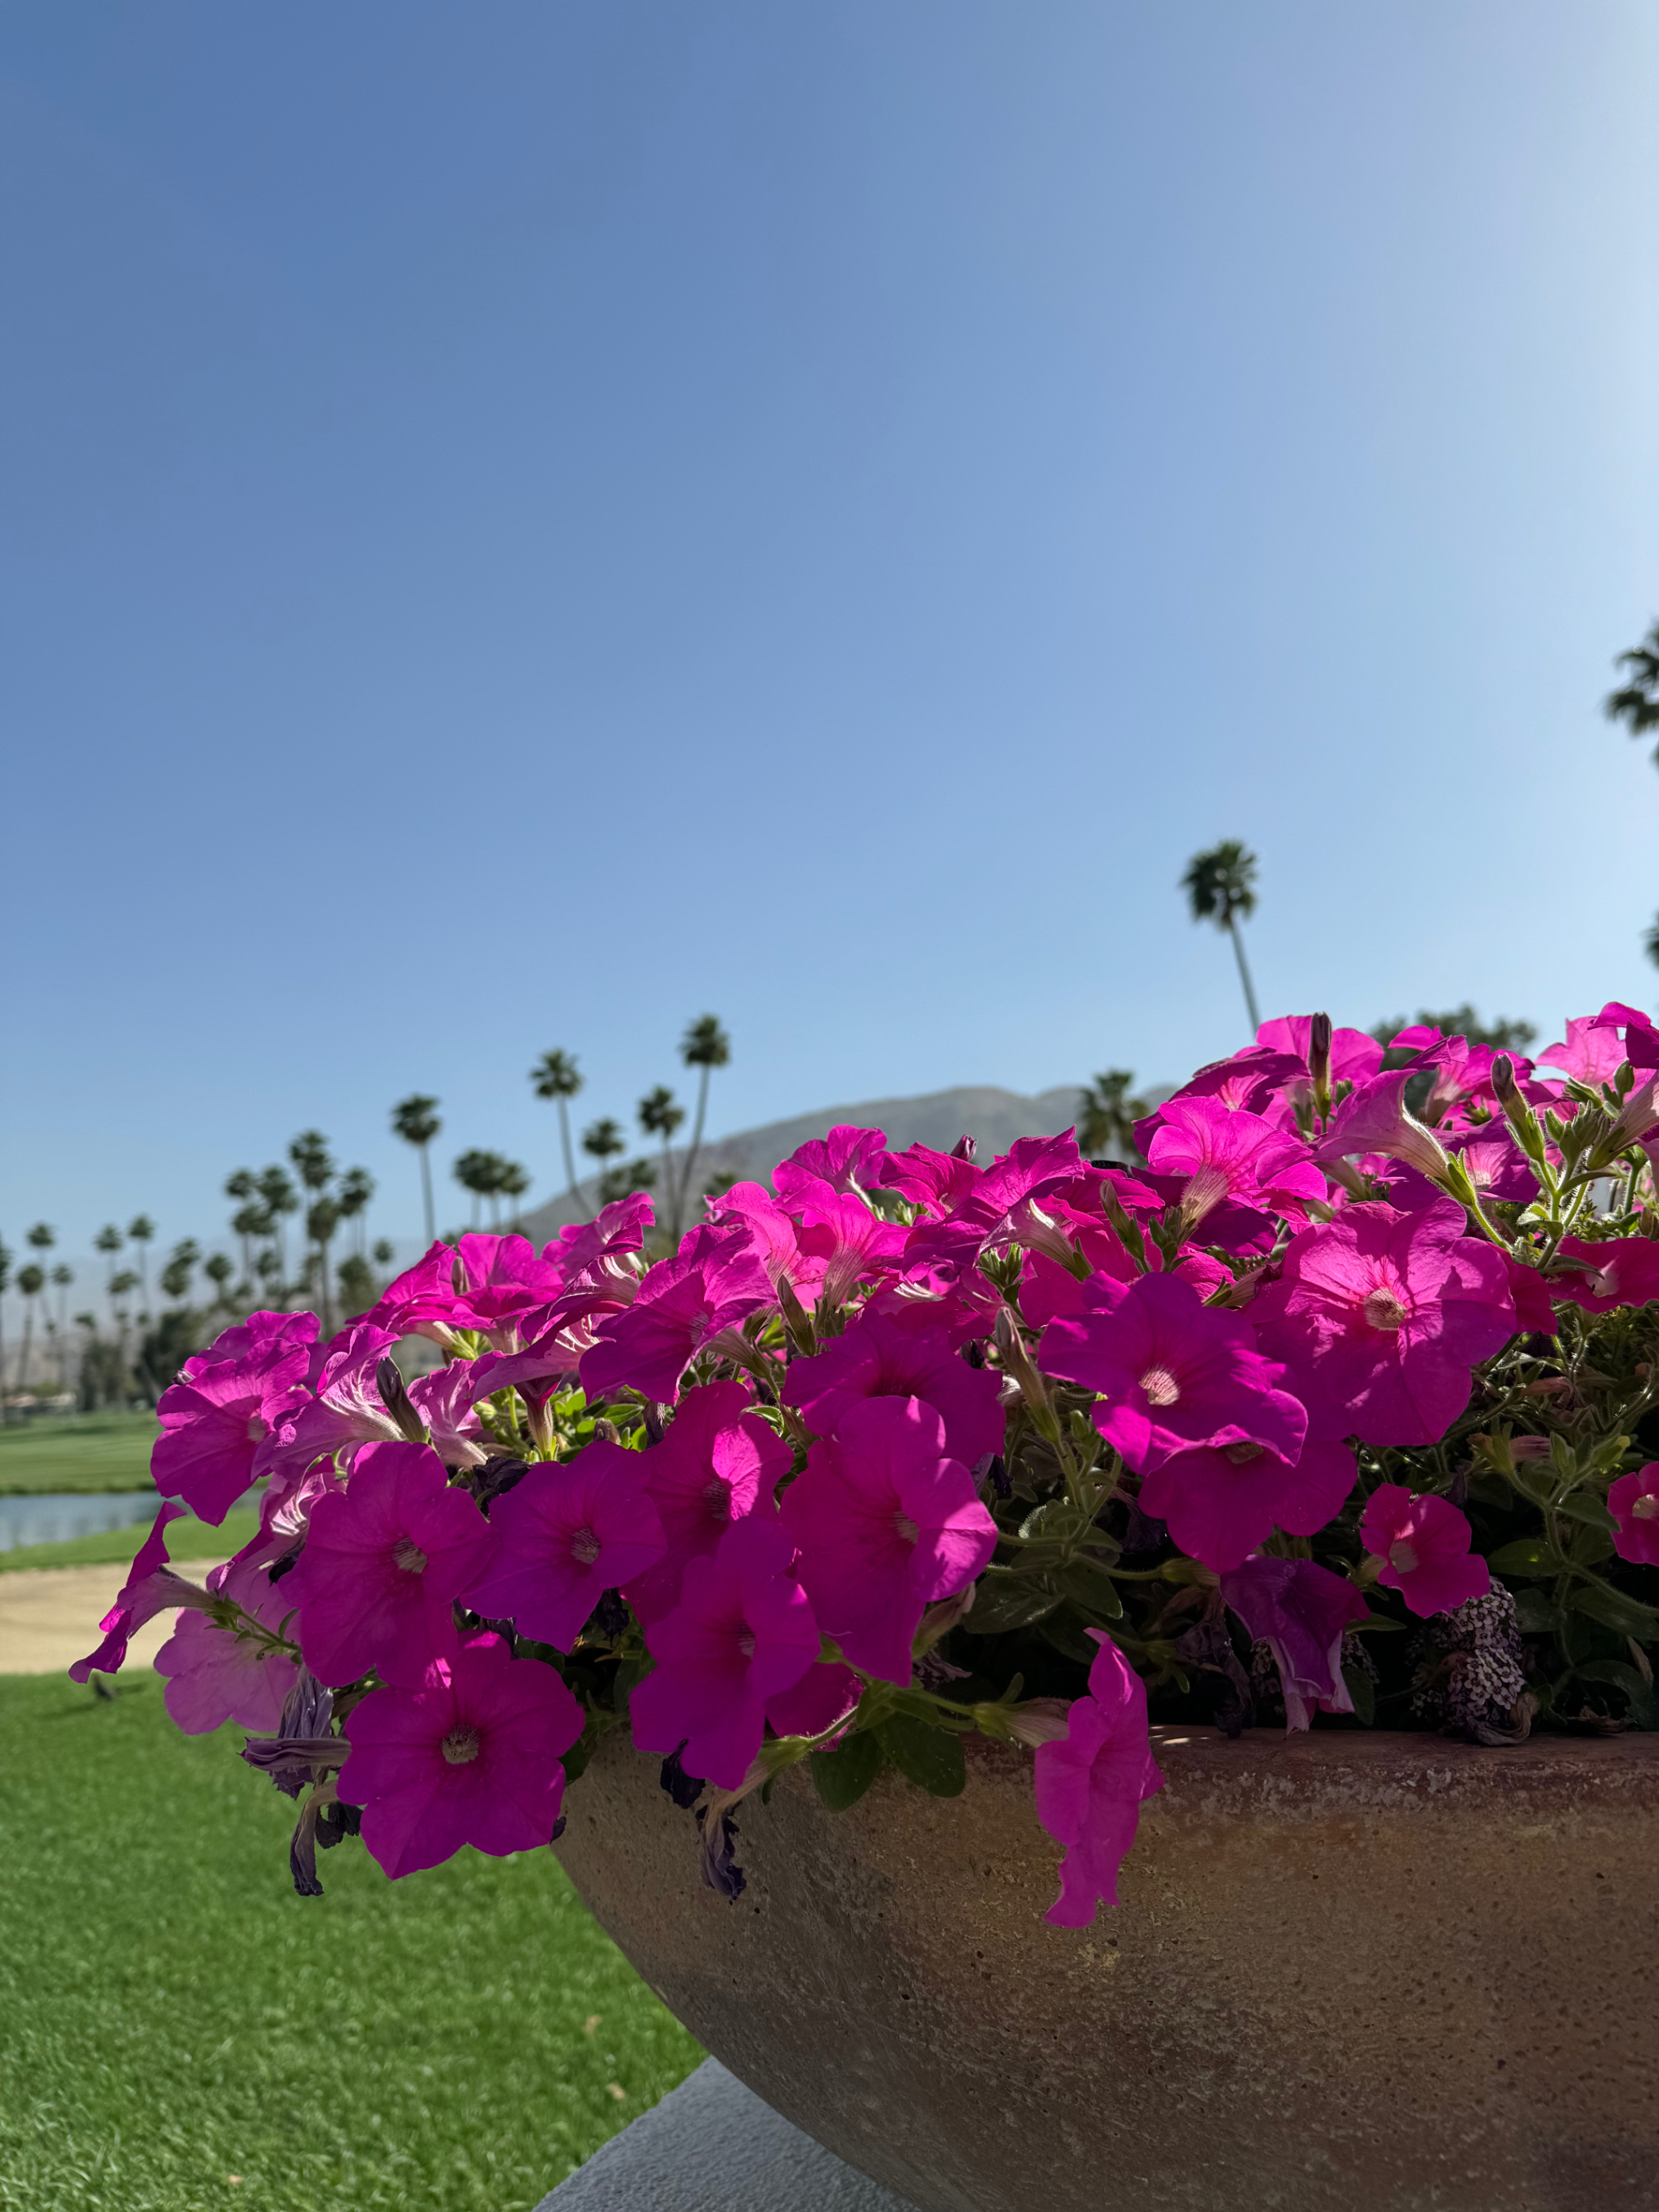 Brightly blooming flowers in a planter with palm trees and a clear sky in the background, suggesting a sunny travel destination